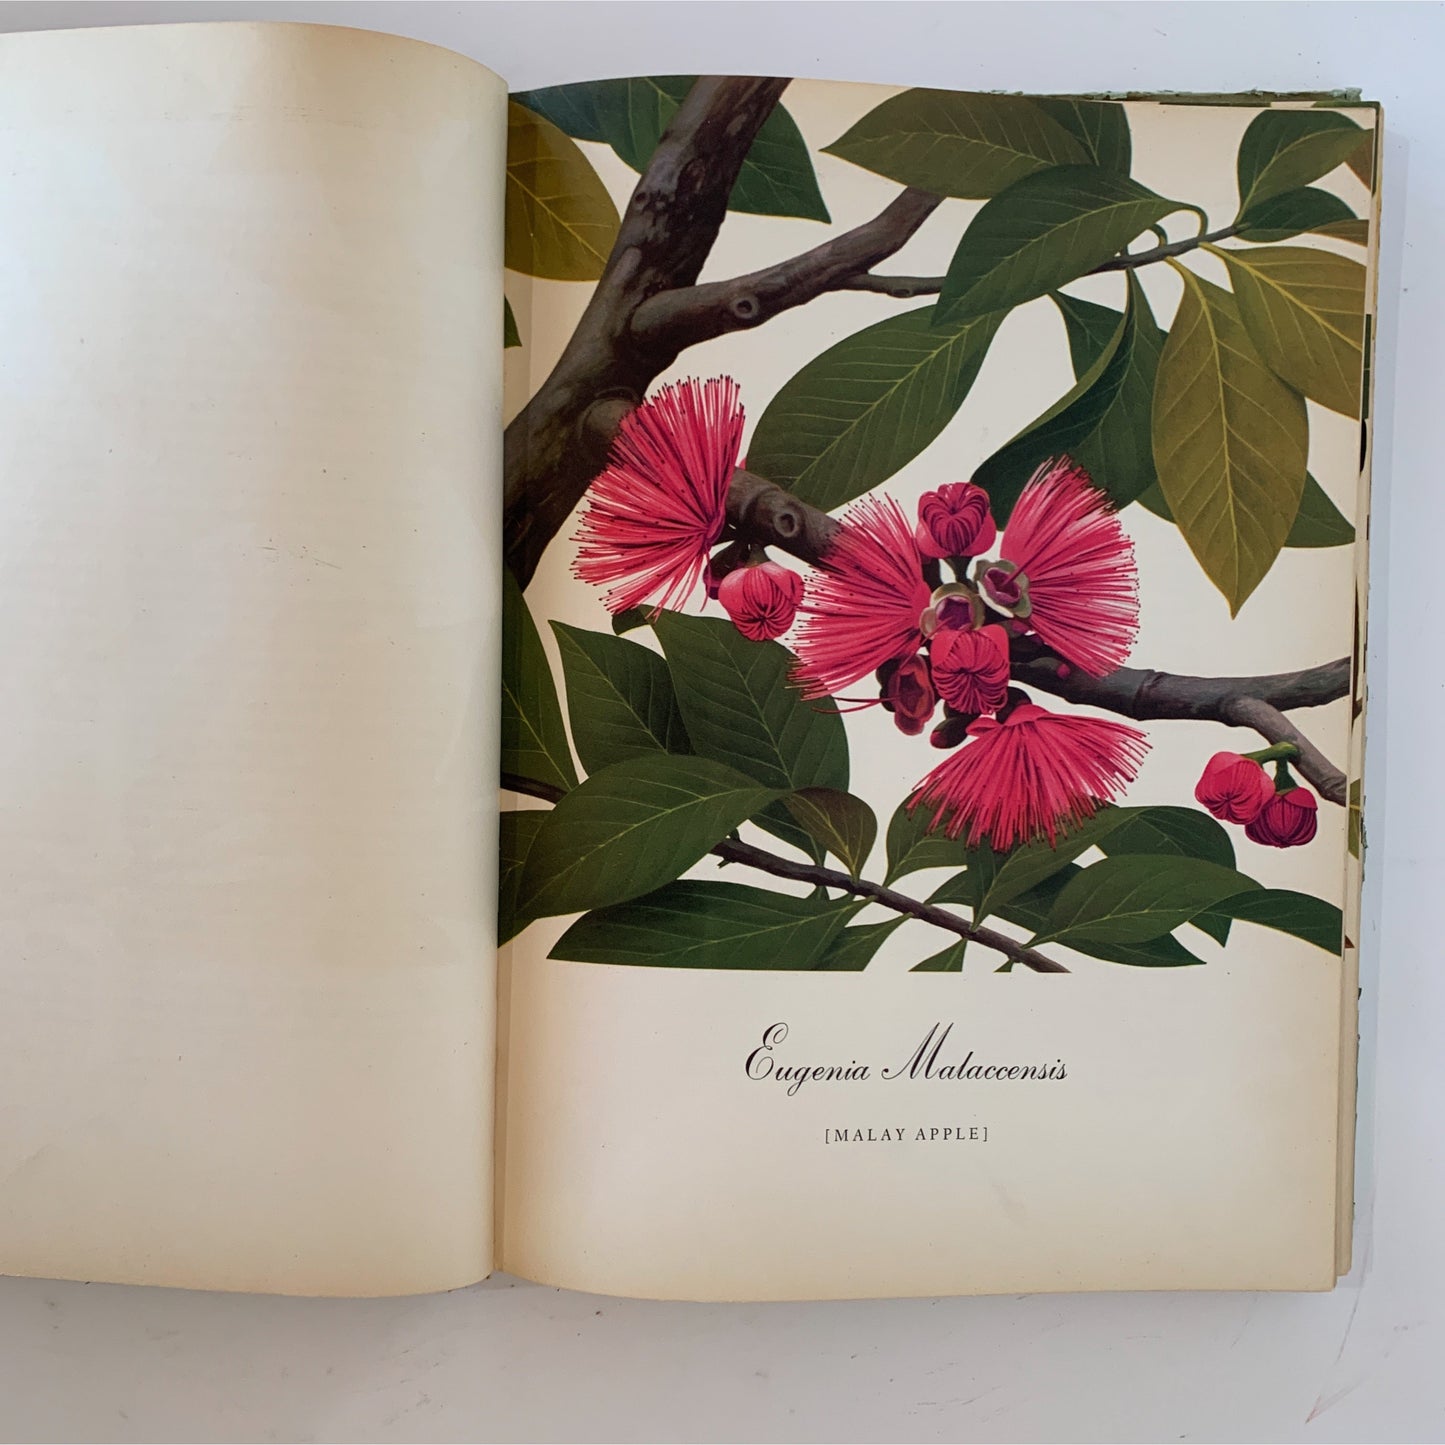 Flowering Trees of the Caribbean, 1951 Illustrated Botanical Book